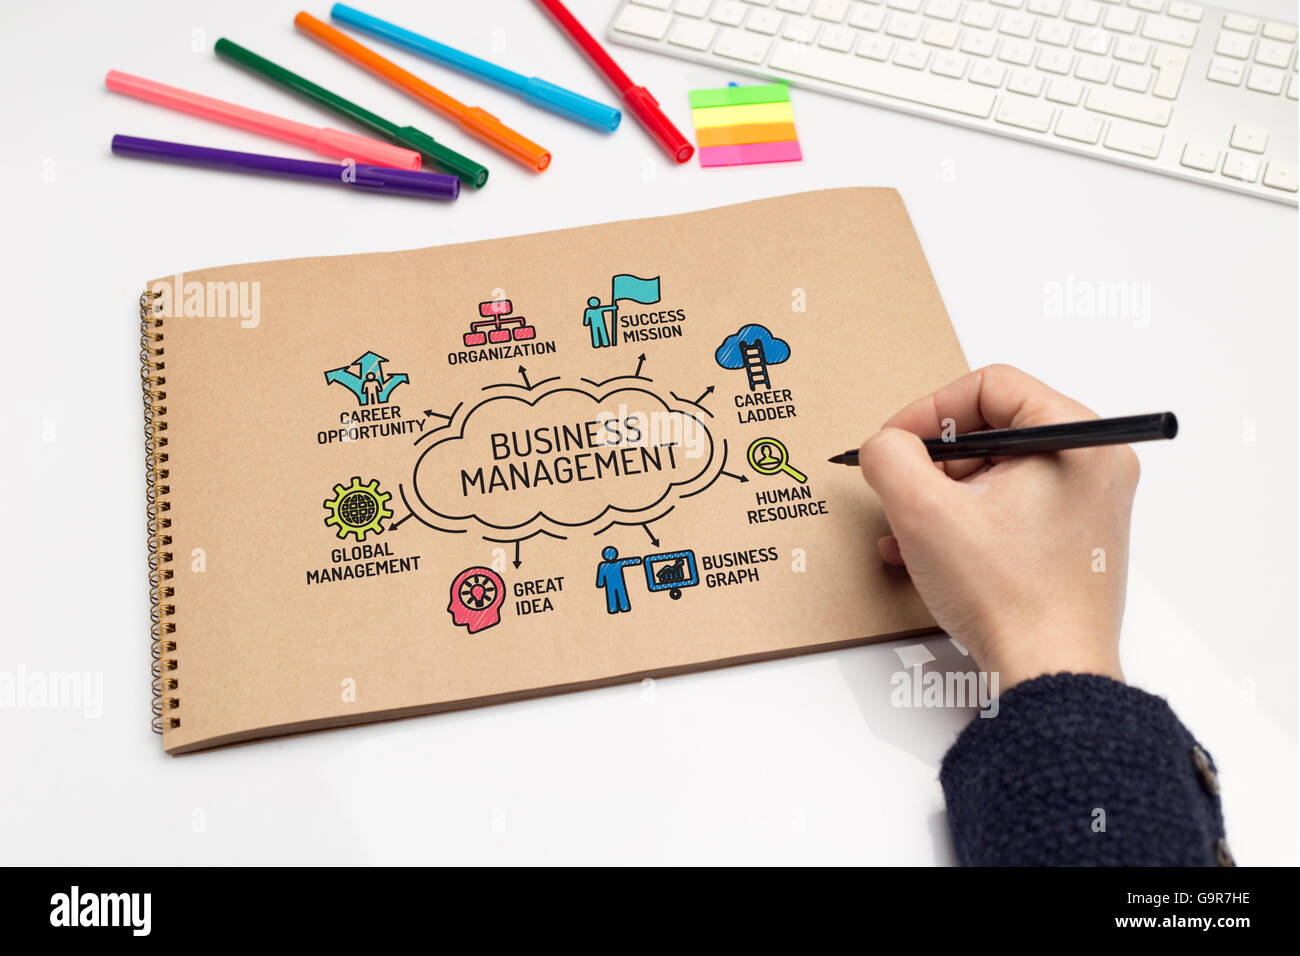 Business Management chart with keywords and sketch icons Stock Photo